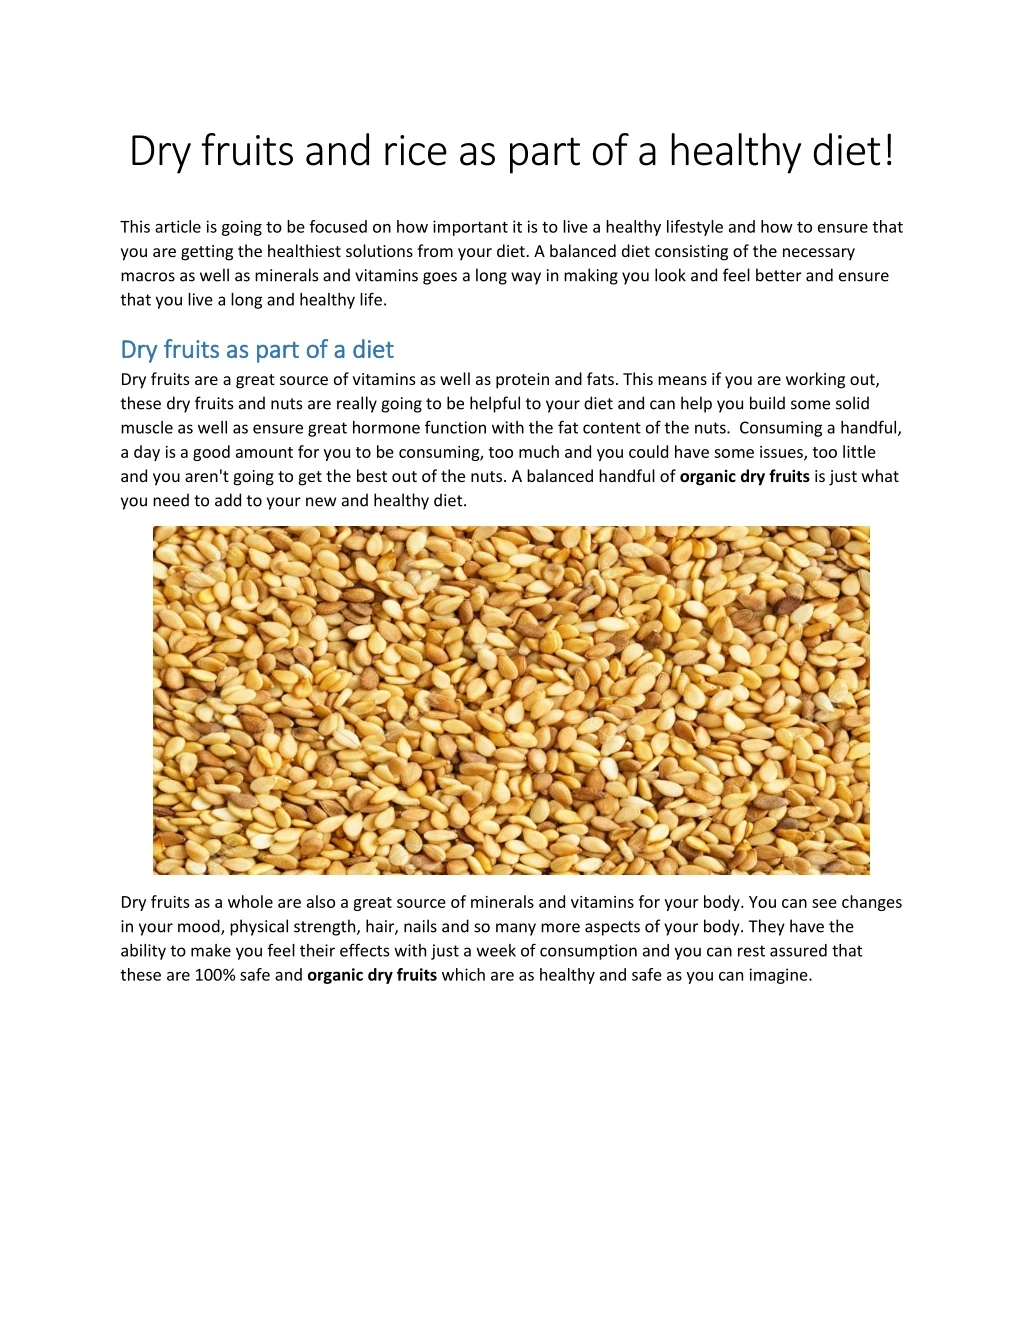 dry fruits and rice as part of a healthy diet